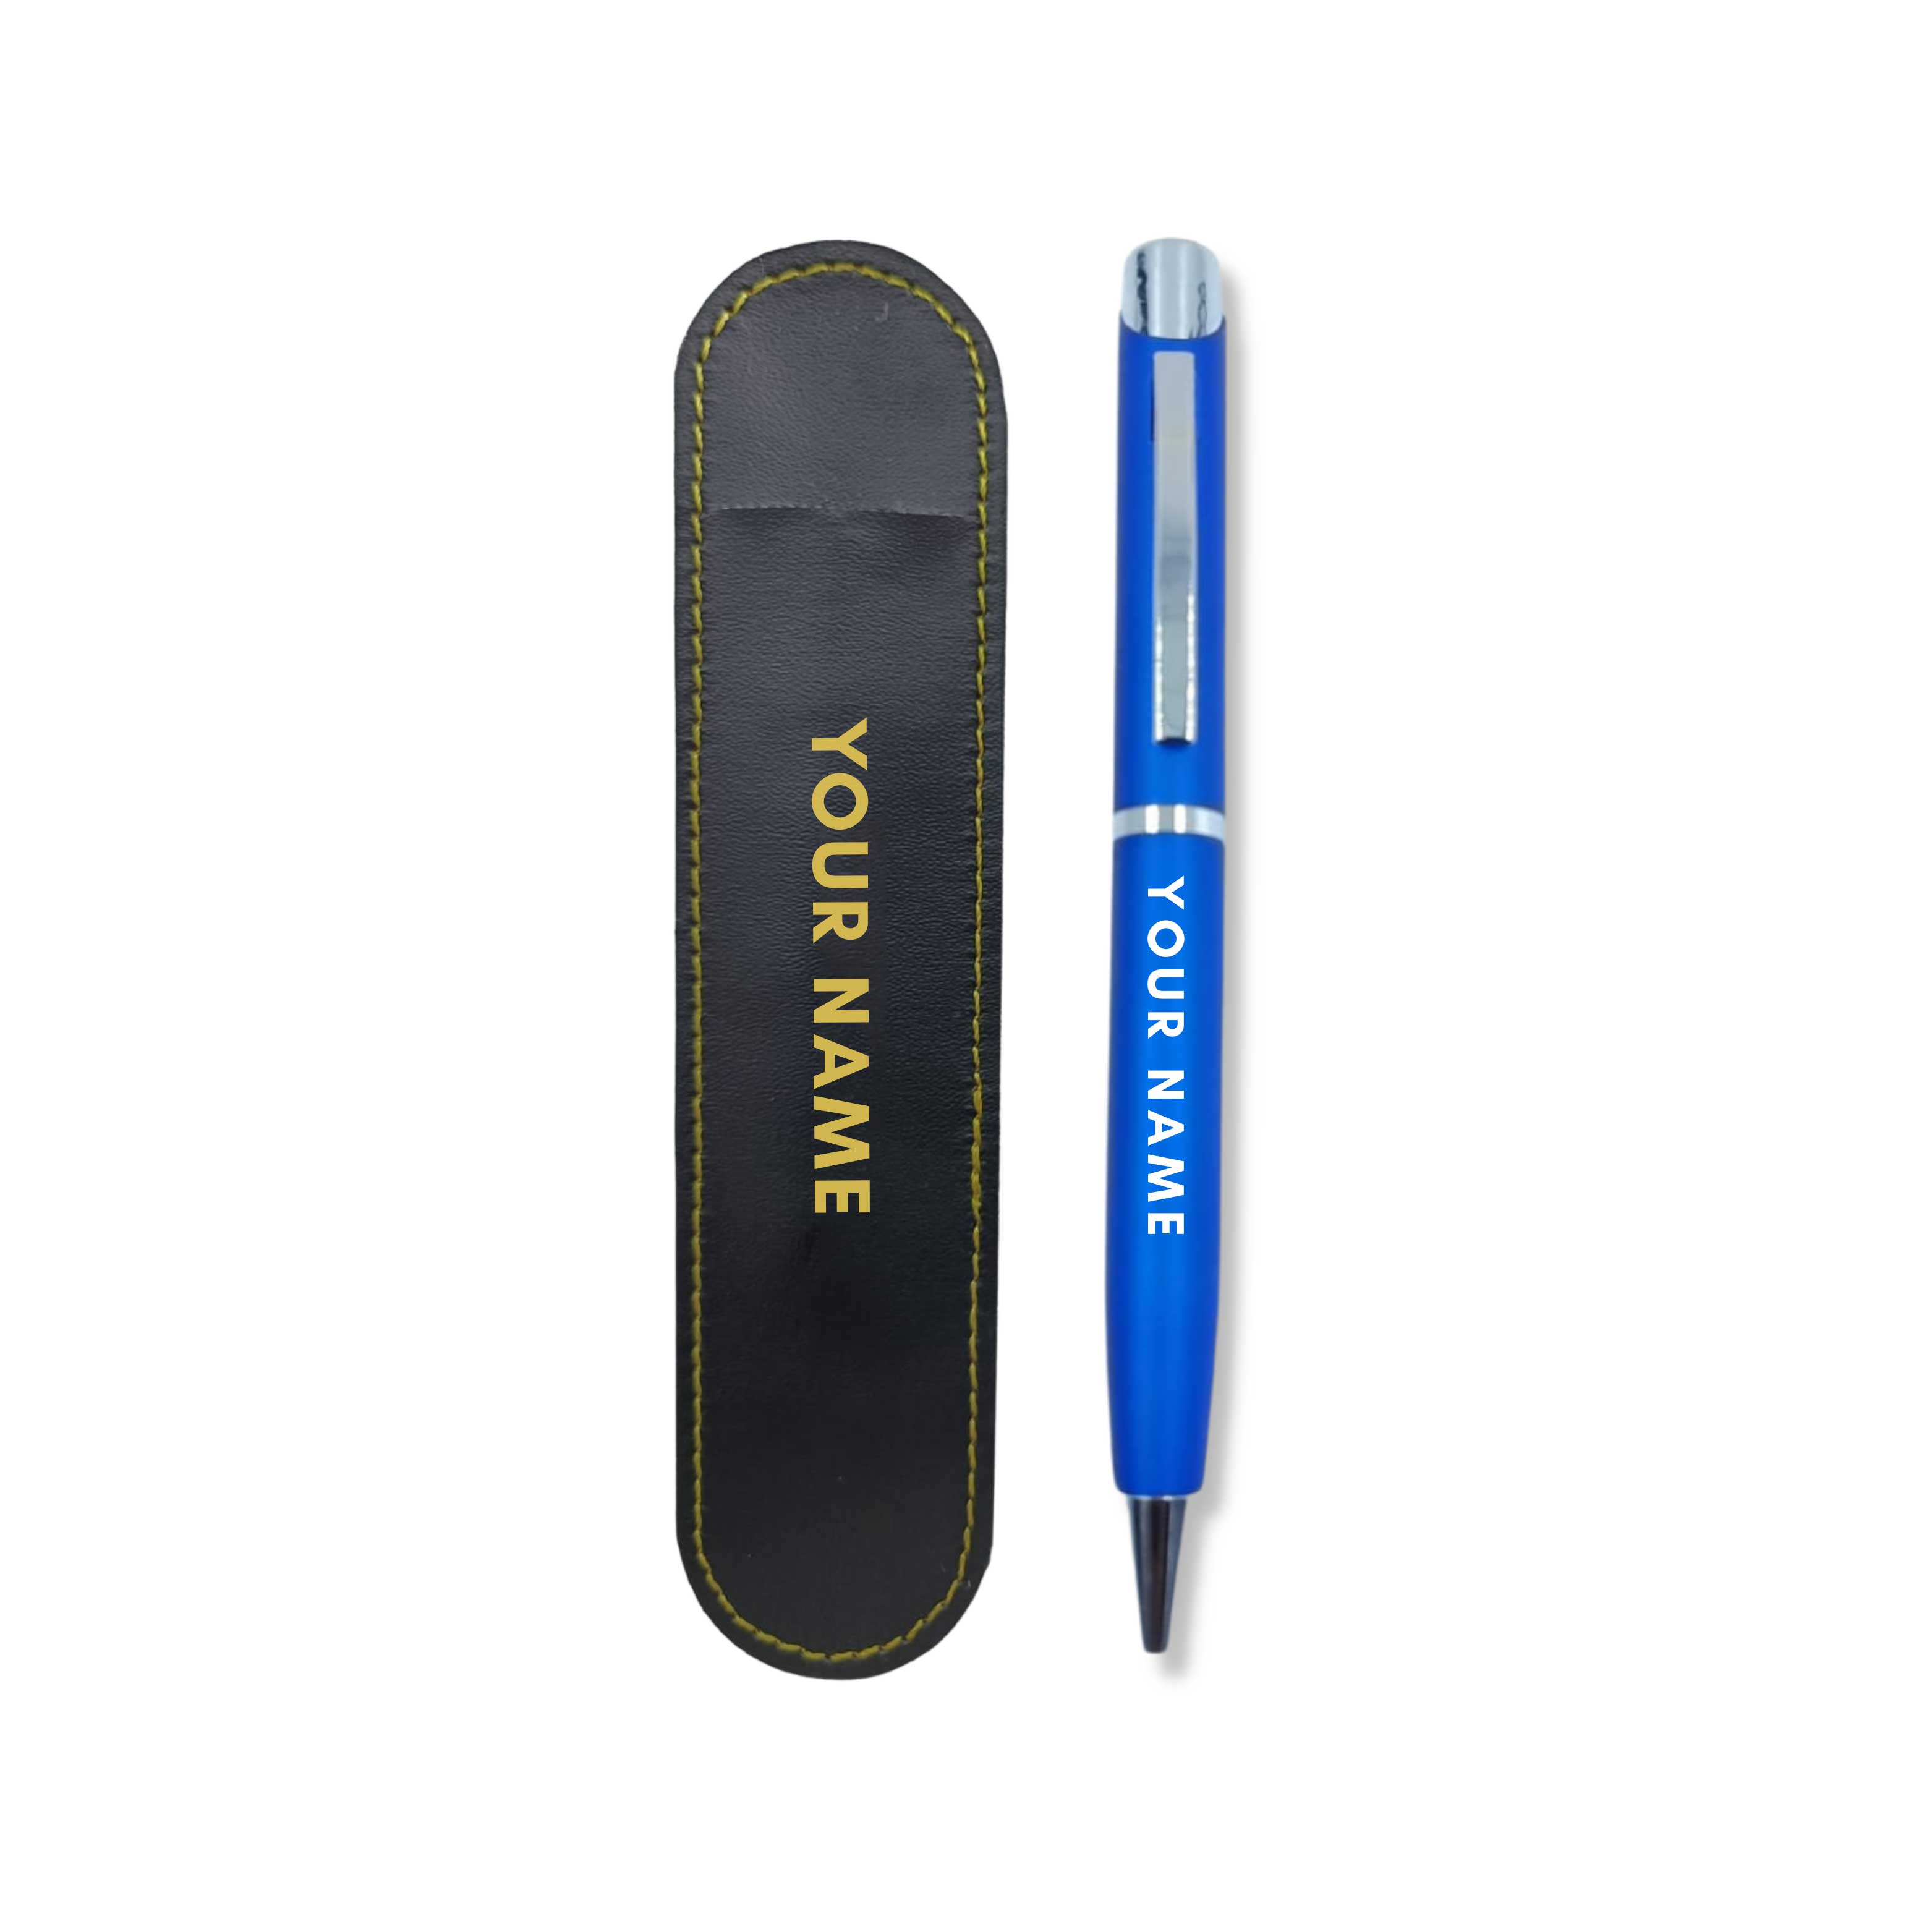 Ancolo Custom Ink Pen with Name on the Pen - India | Ubuy